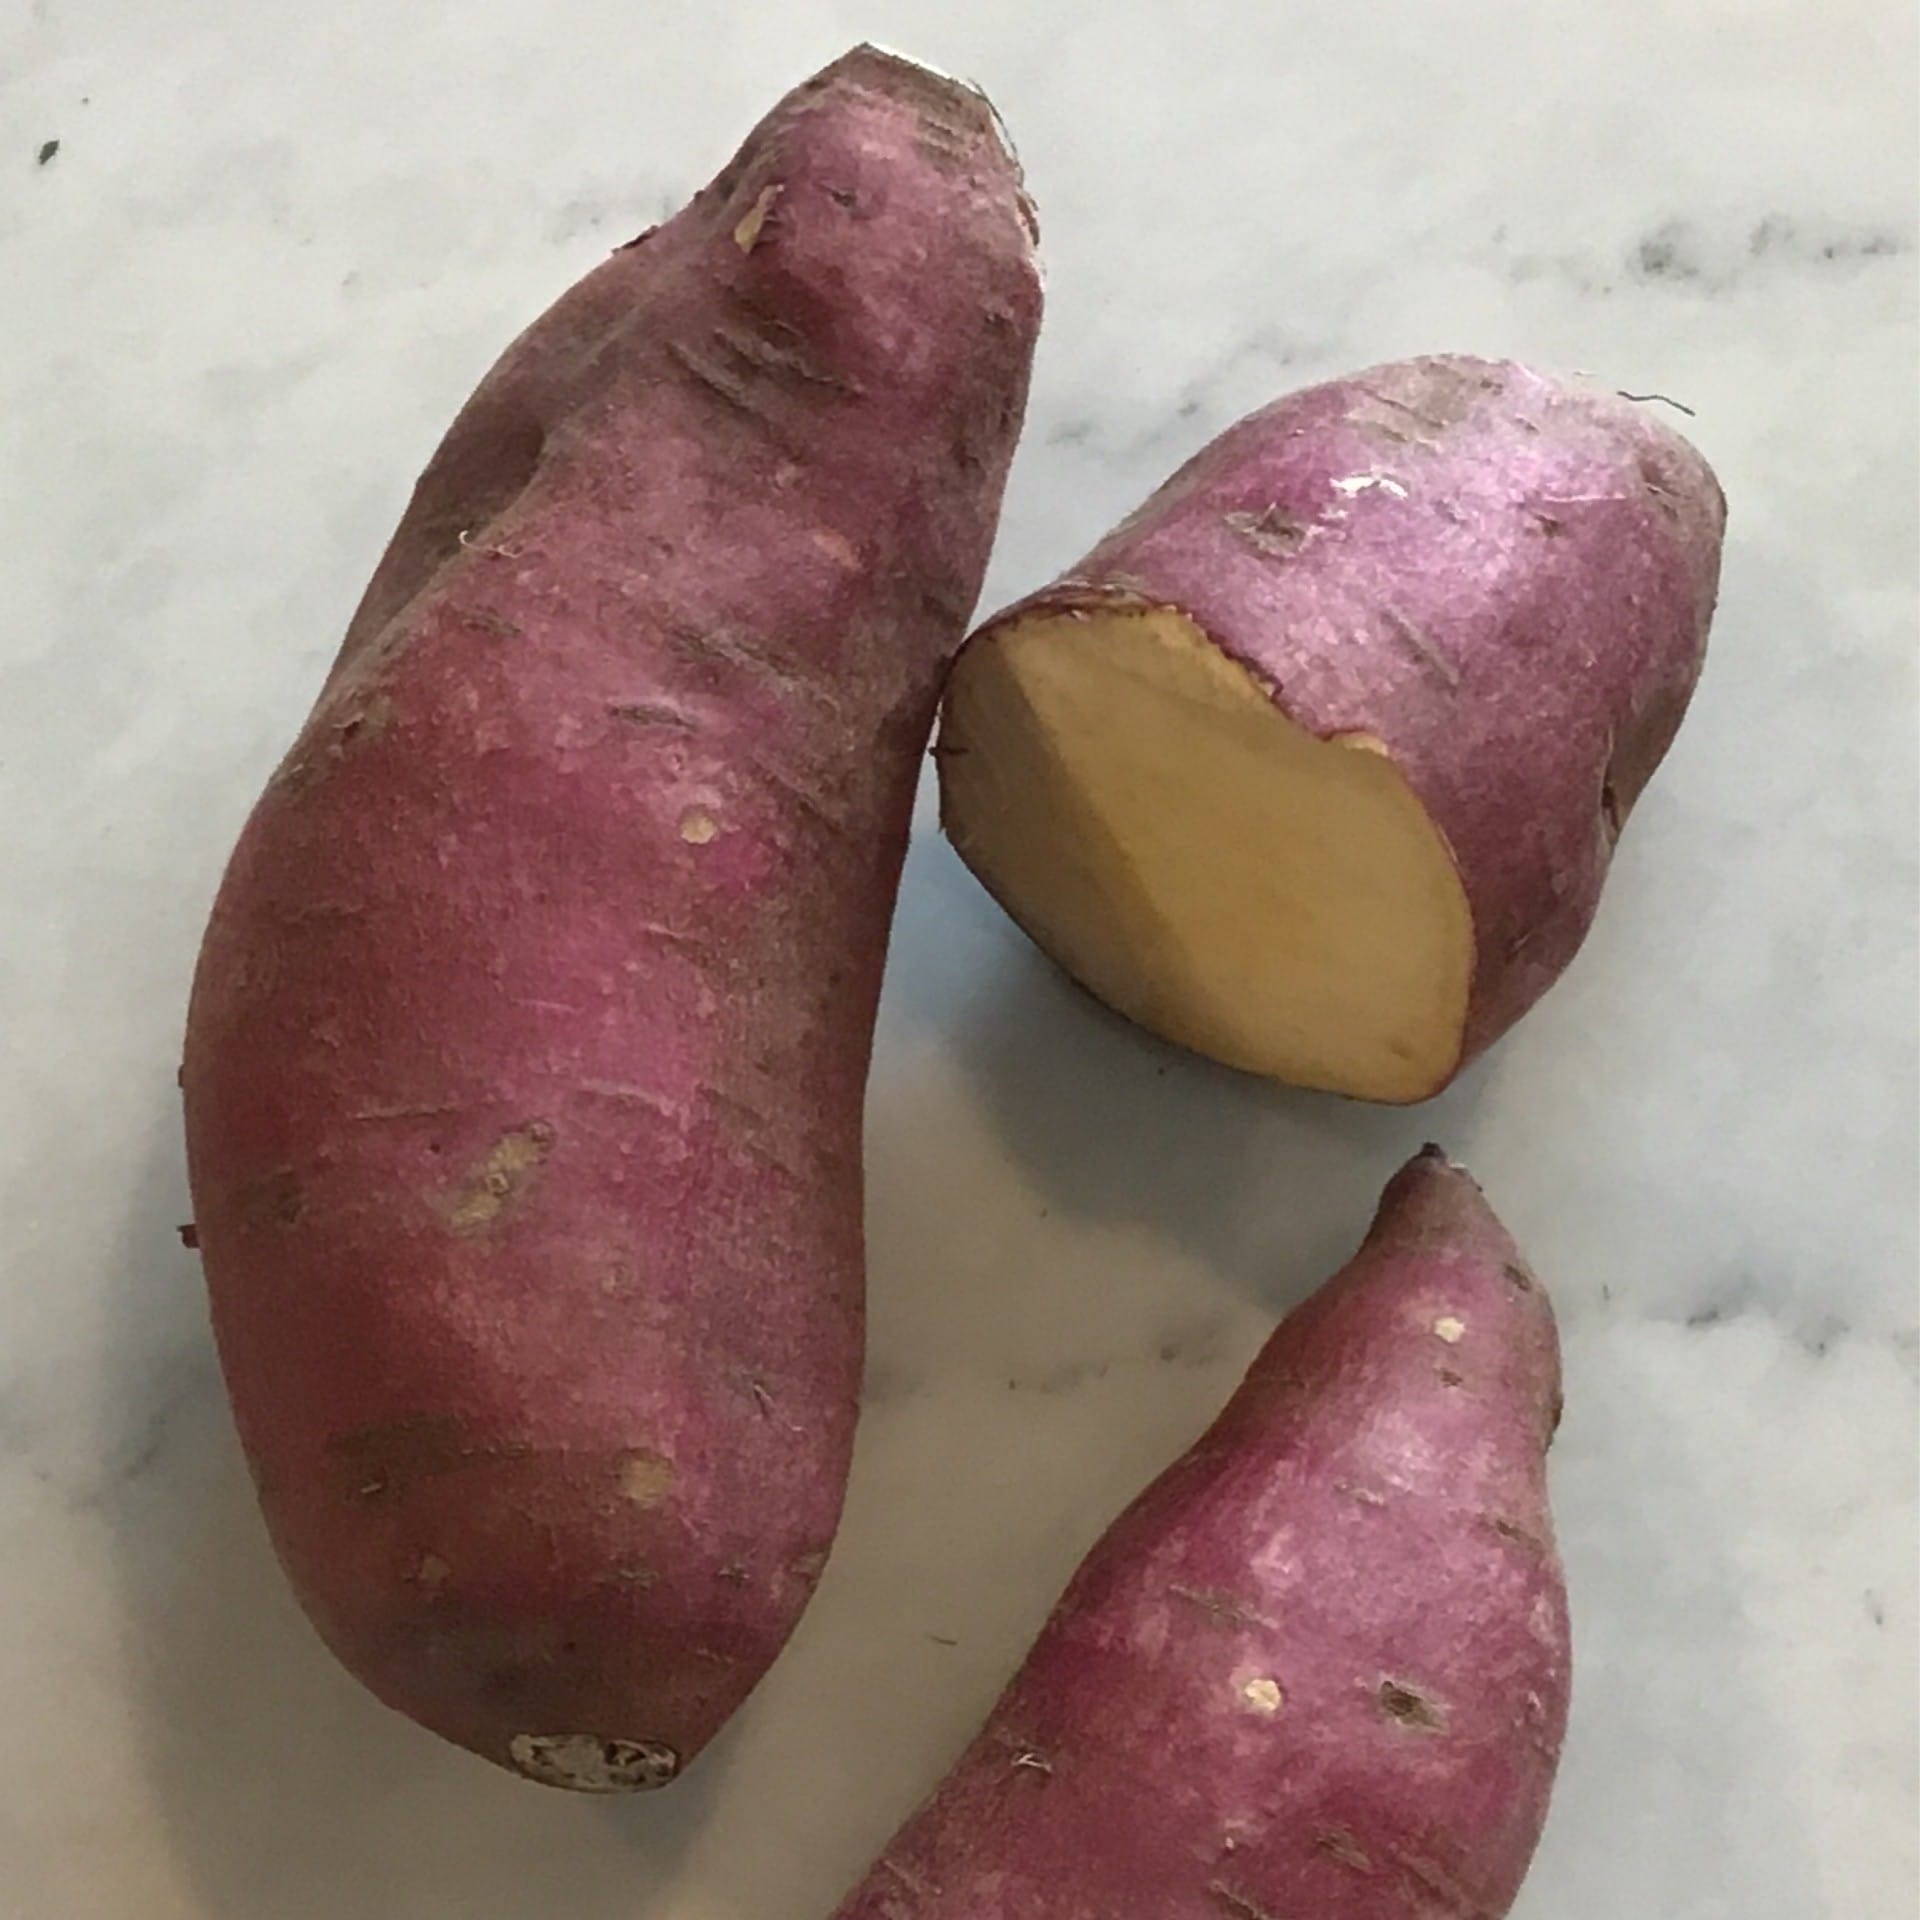 sold out sweet potatoes purple white flesh 2 quality